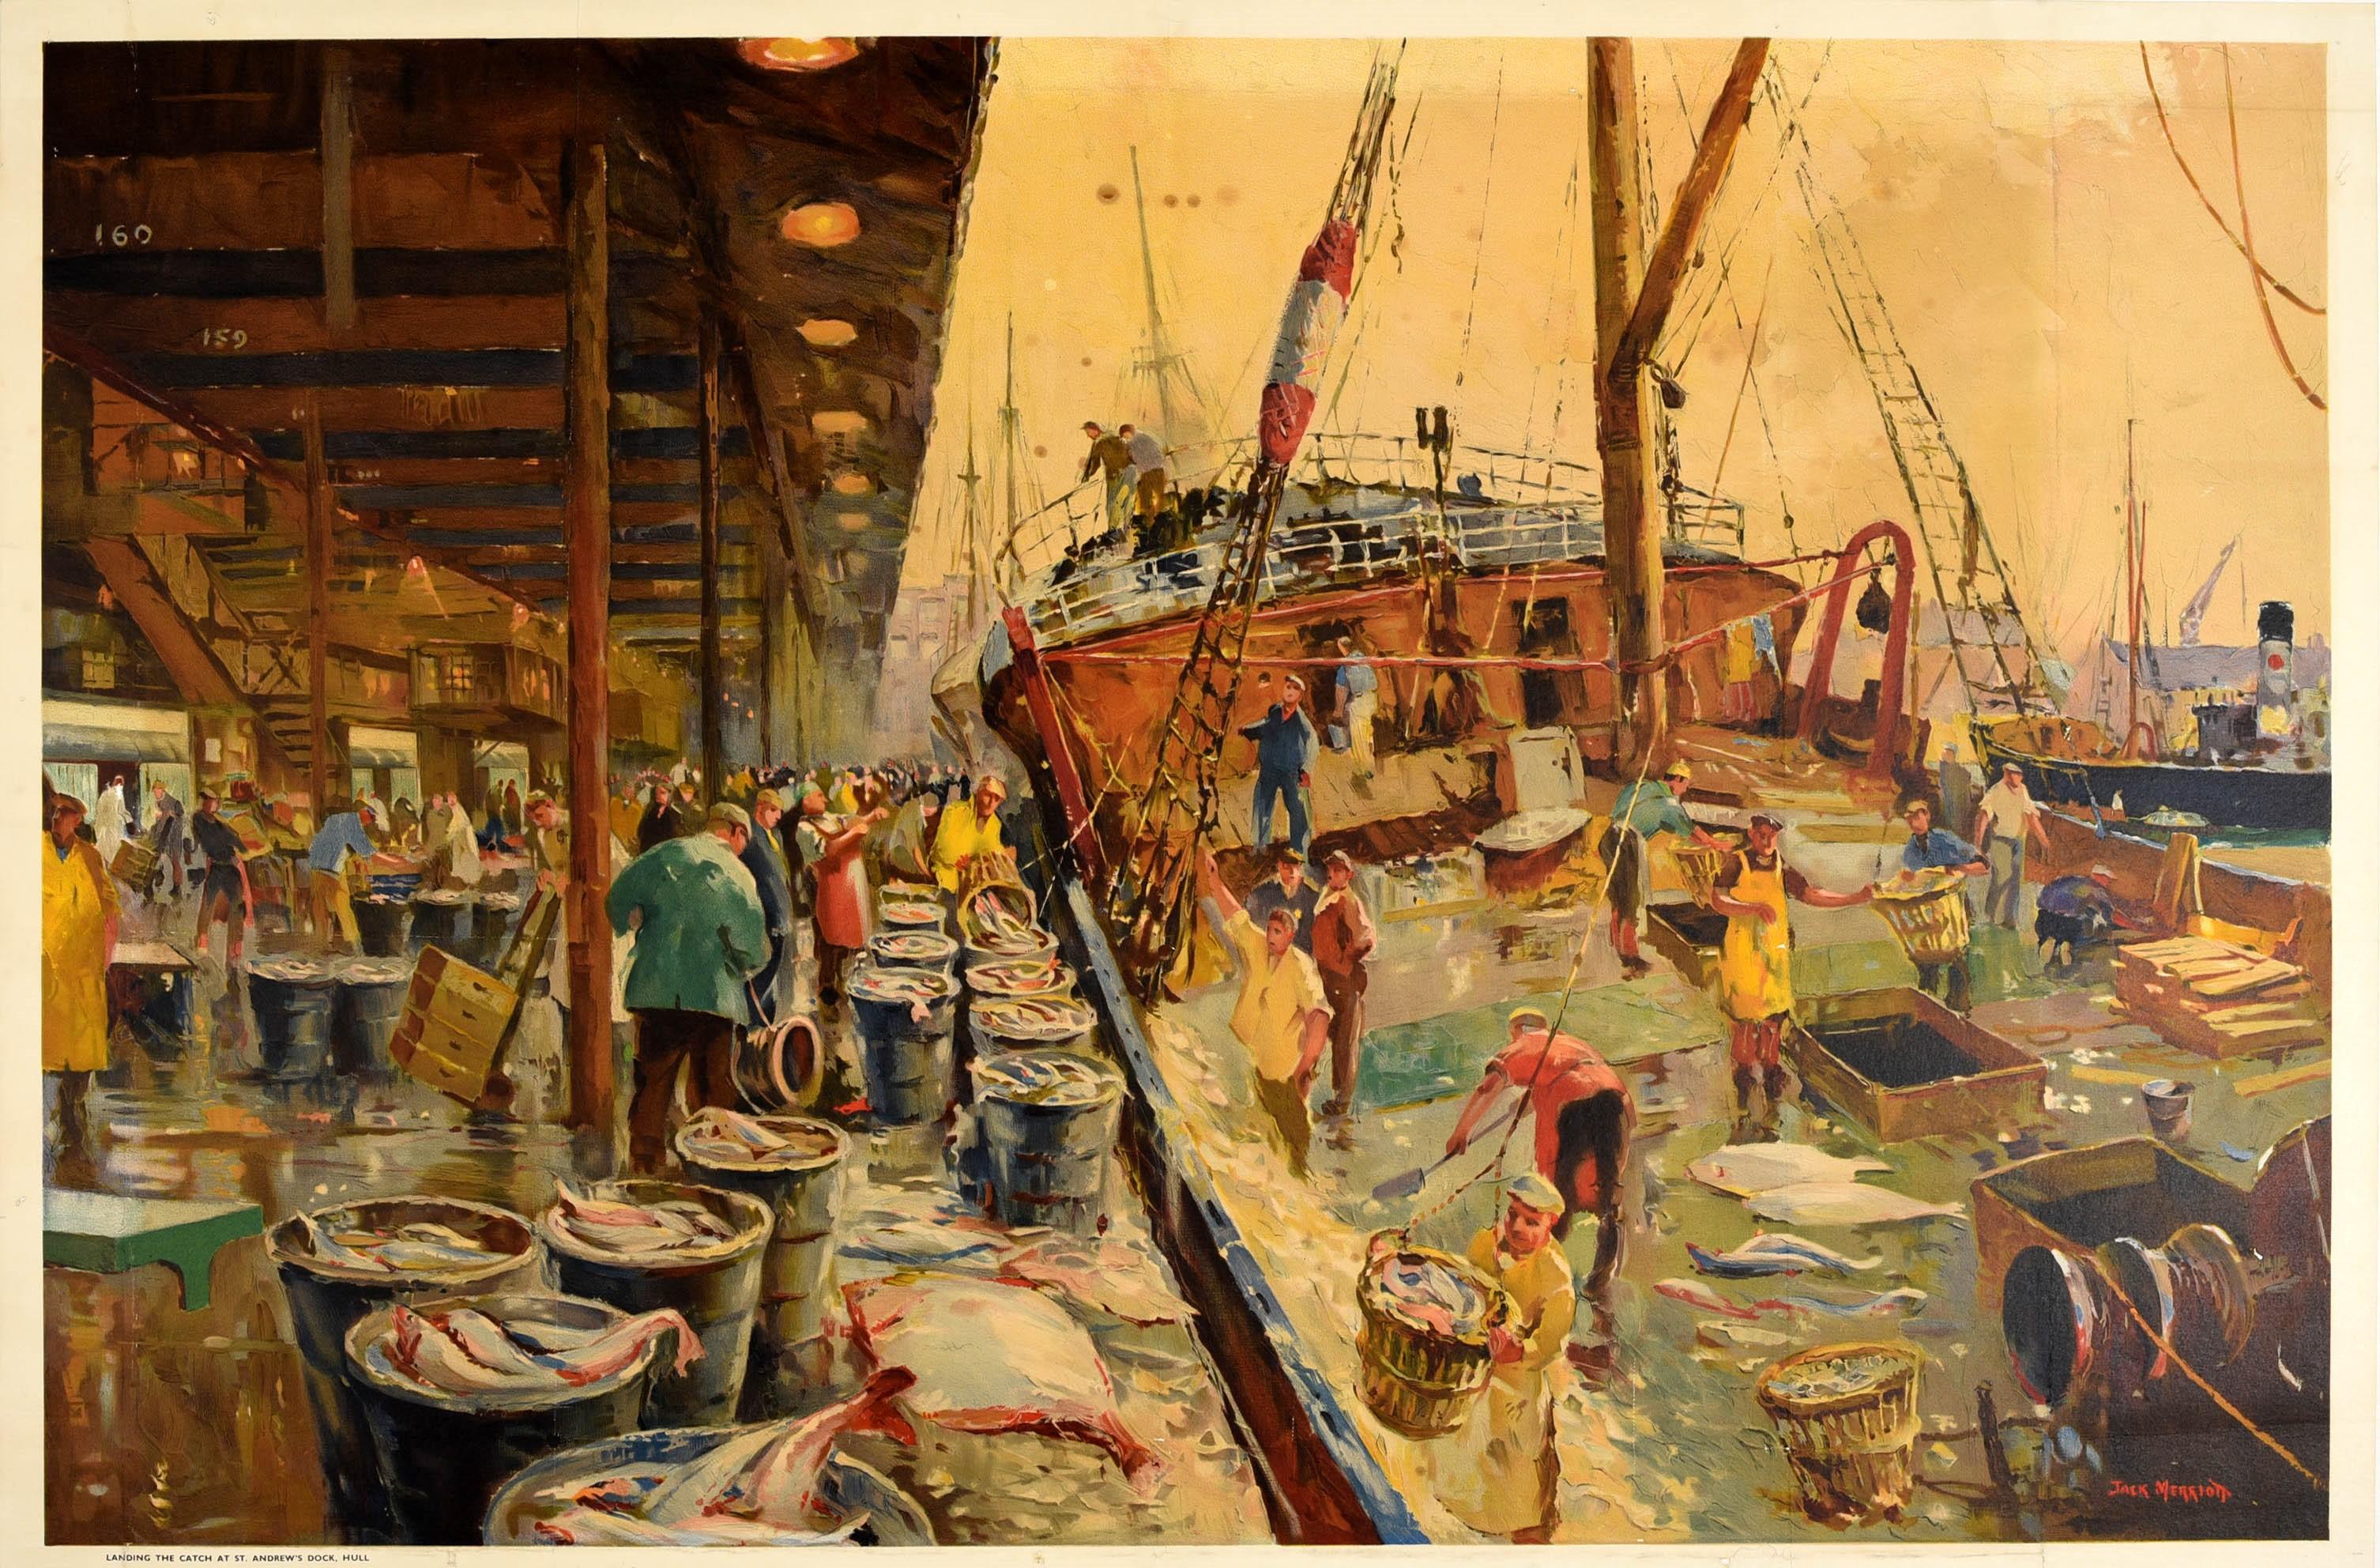 Original vintage British Railways travel poster - Service To The Fishing Industry Landing the Catch at St Andrew's Dock Hull - featuring artwork by Jack Merriott (1901-1968) of fishermen working on a busy dockside with containers full of fish and